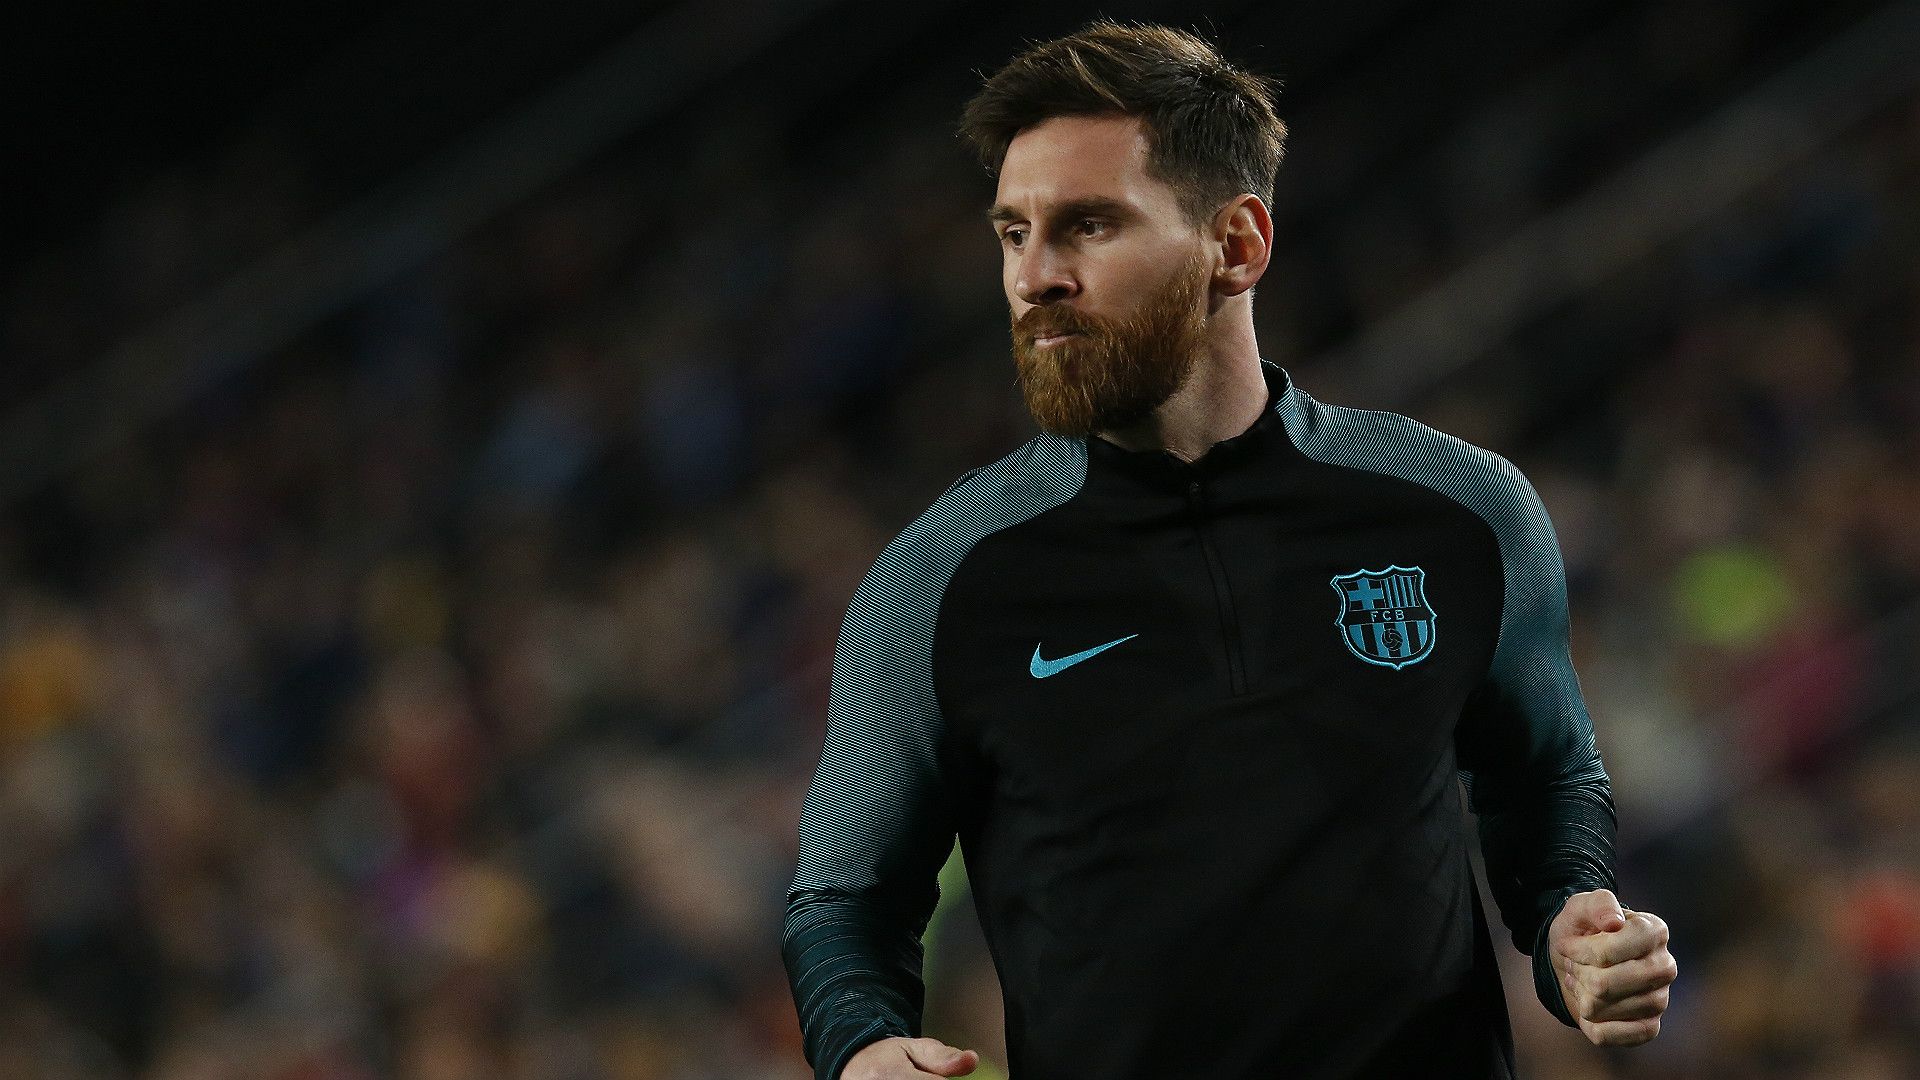 What is Lionel Messi's net worth and how much does the Barcelona